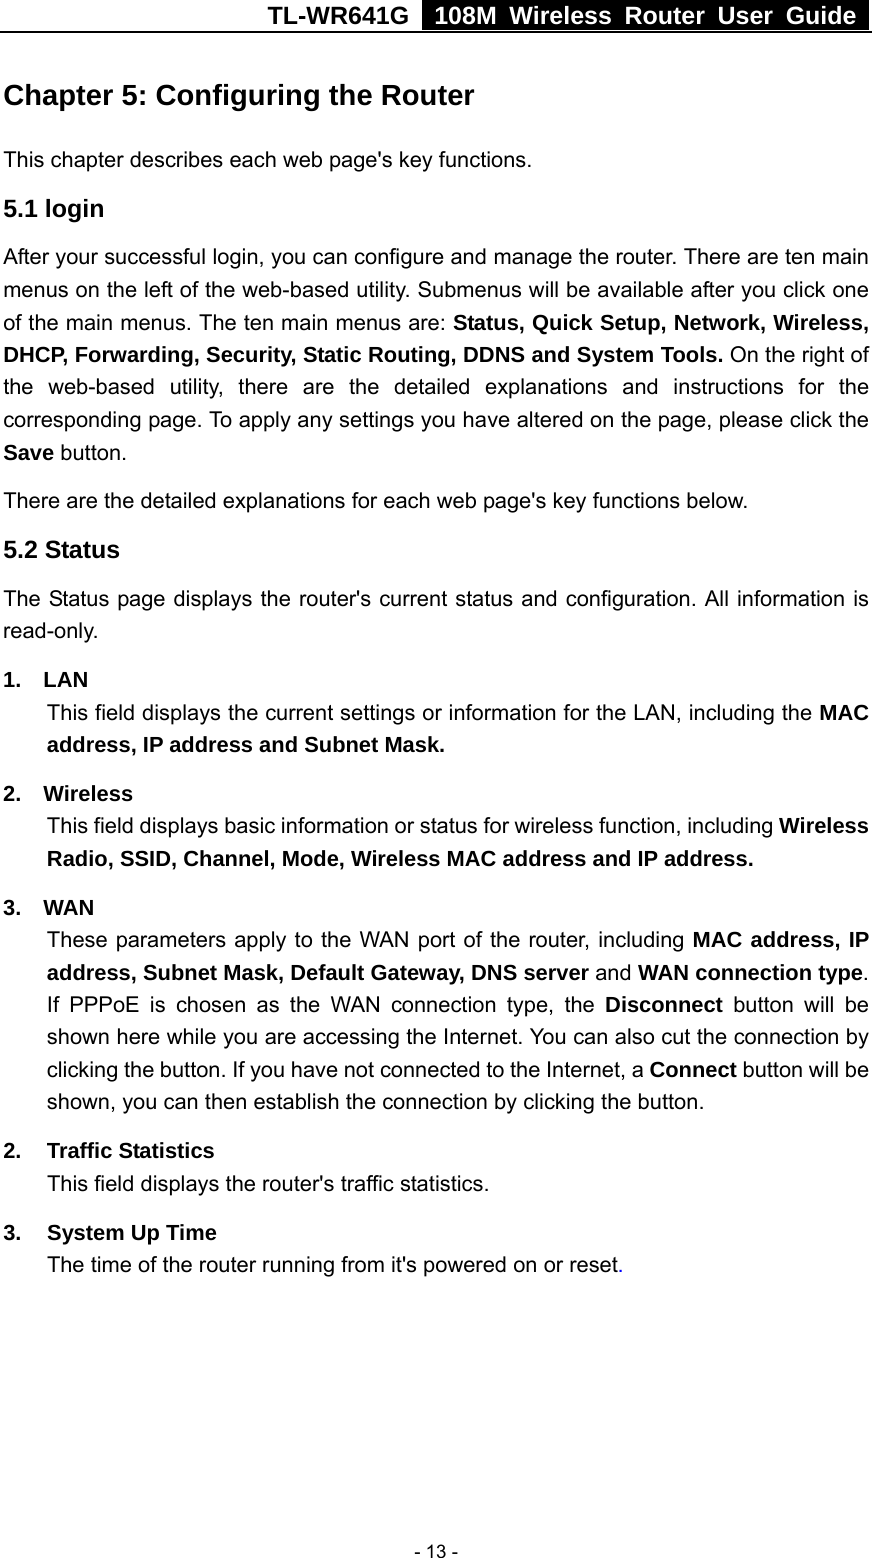 TL-WR641G   108M Wireless Router User Guide   - 13 -Chapter 5: Configuring the Router This chapter describes each web page&apos;s key functions. 5.1 login   After your successful login, you can configure and manage the router. There are ten main menus on the left of the web-based utility. Submenus will be available after you click one of the main menus. The ten main menus are: Status, Quick Setup, Network, Wireless, DHCP, Forwarding, Security, Static Routing, DDNS and System Tools. On the right of the web-based utility, there are the detailed explanations and instructions for the corresponding page. To apply any settings you have altered on the page, please click the Save button.   There are the detailed explanations for each web page&apos;s key functions below.   5.2 Status The Status page displays the router&apos;s current status and configuration. All information is read-only. 1.  LAN This field displays the current settings or information for the LAN, including the MAC address, IP address and Subnet Mask. 2.  Wireless This field displays basic information or status for wireless function, including Wireless Radio, SSID, Channel, Mode, Wireless MAC address and IP address. 3.  WAN These parameters apply to the WAN port of the router, including MAC address, IP address, Subnet Mask, Default Gateway, DNS server and WAN connection type. If PPPoE is chosen as the WAN connection type, the Disconnect button will be shown here while you are accessing the Internet. You can also cut the connection by clicking the button. If you have not connected to the Internet, a Connect button will be shown, you can then establish the connection by clicking the button. 2. Traffic Statistics This field displays the router&apos;s traffic statistics.   3.  System Up Time The time of the router running from it&apos;s powered on or reset. 